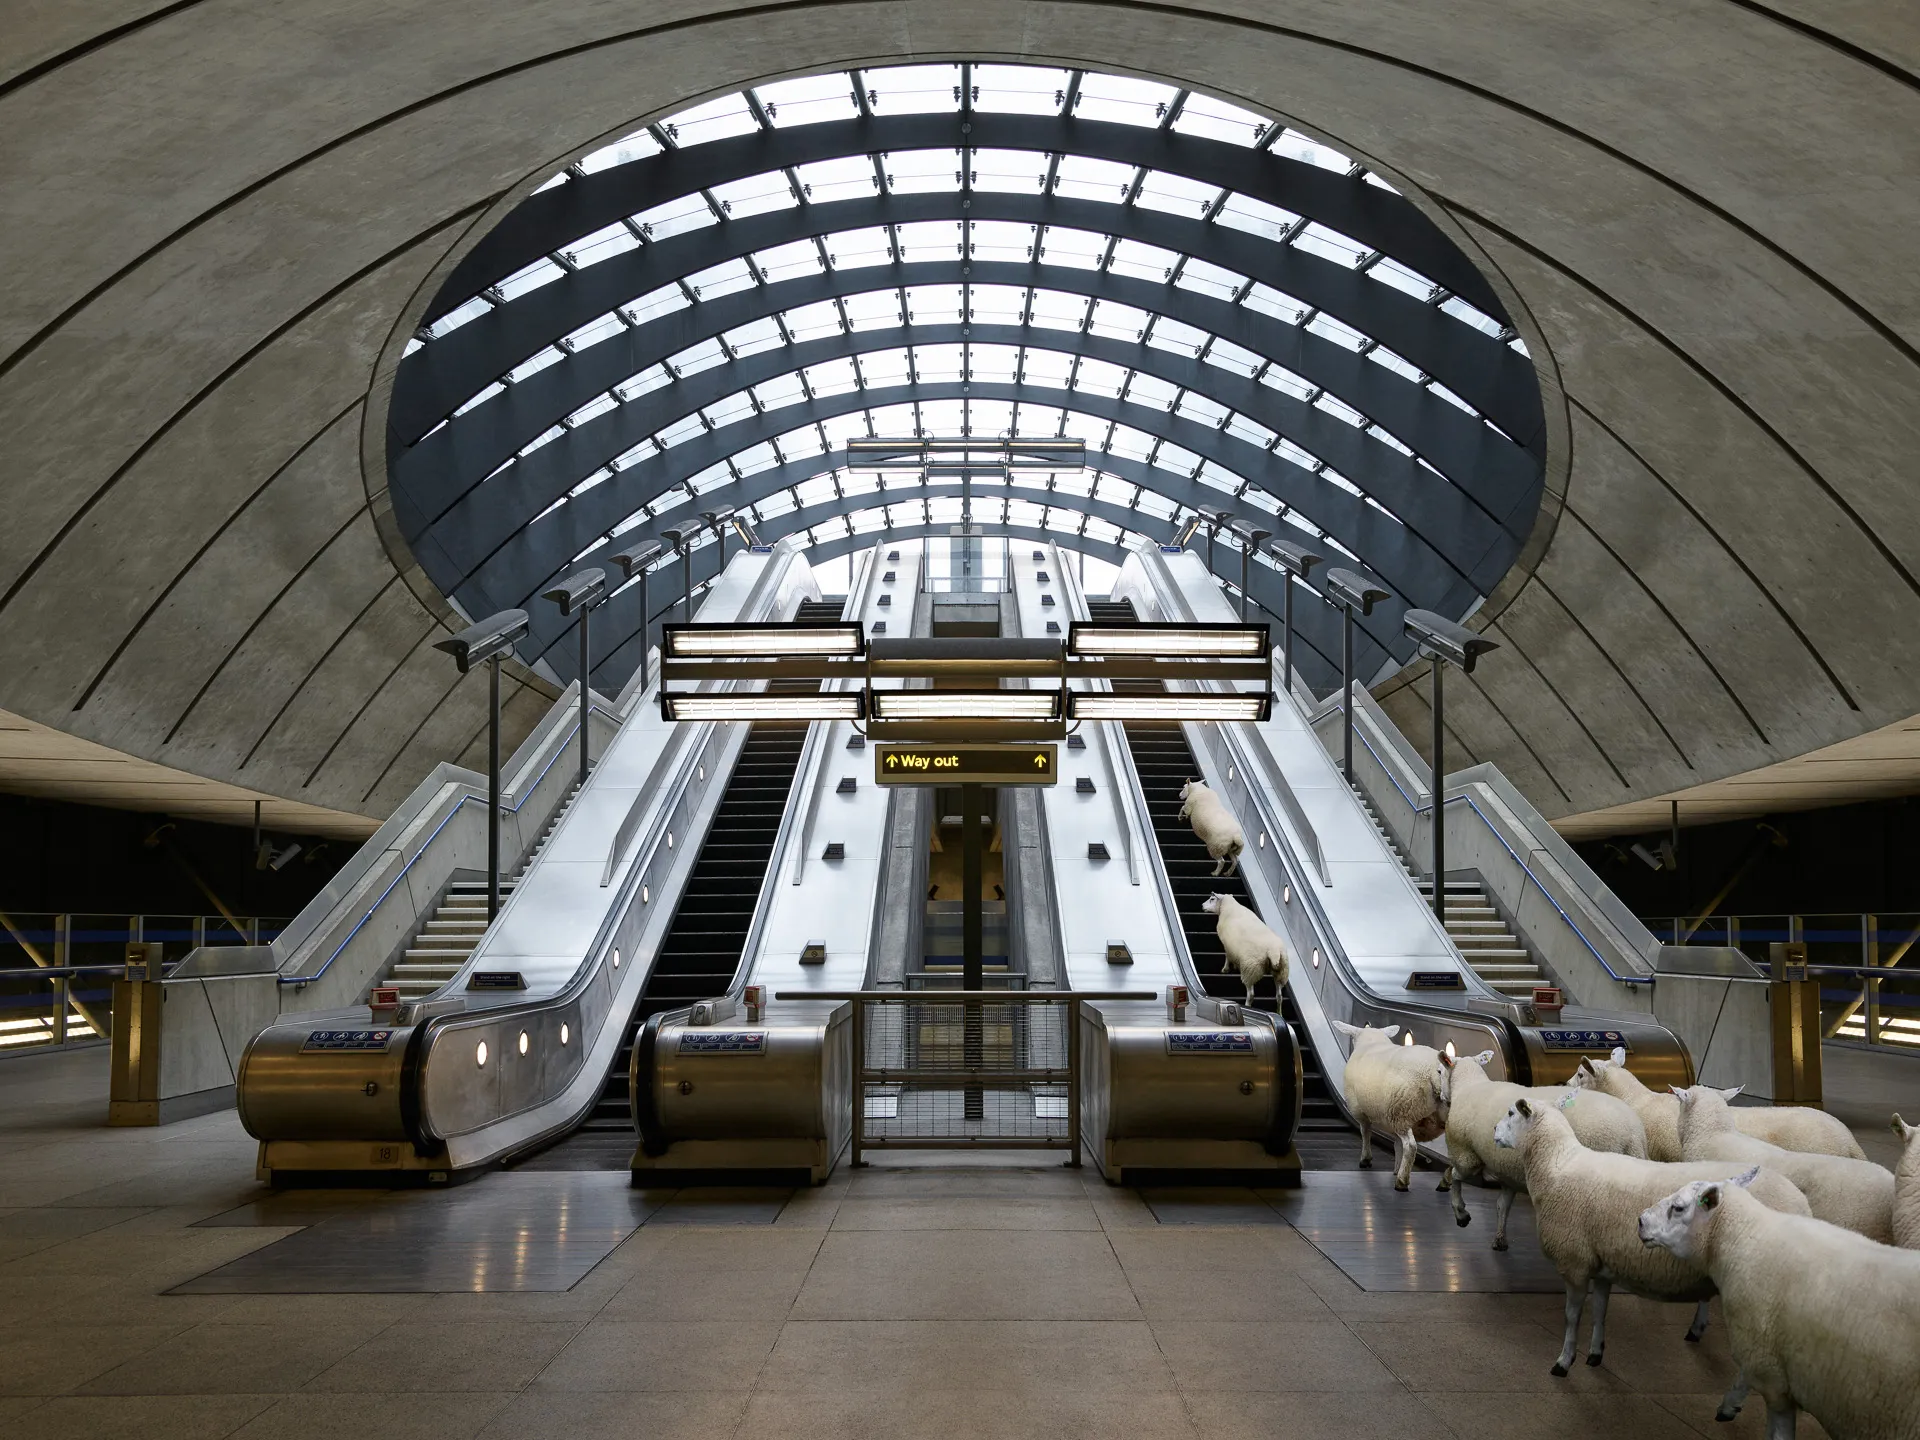 'Sway' influenced by influences - Canary wharf - The light at the end of the tunnel